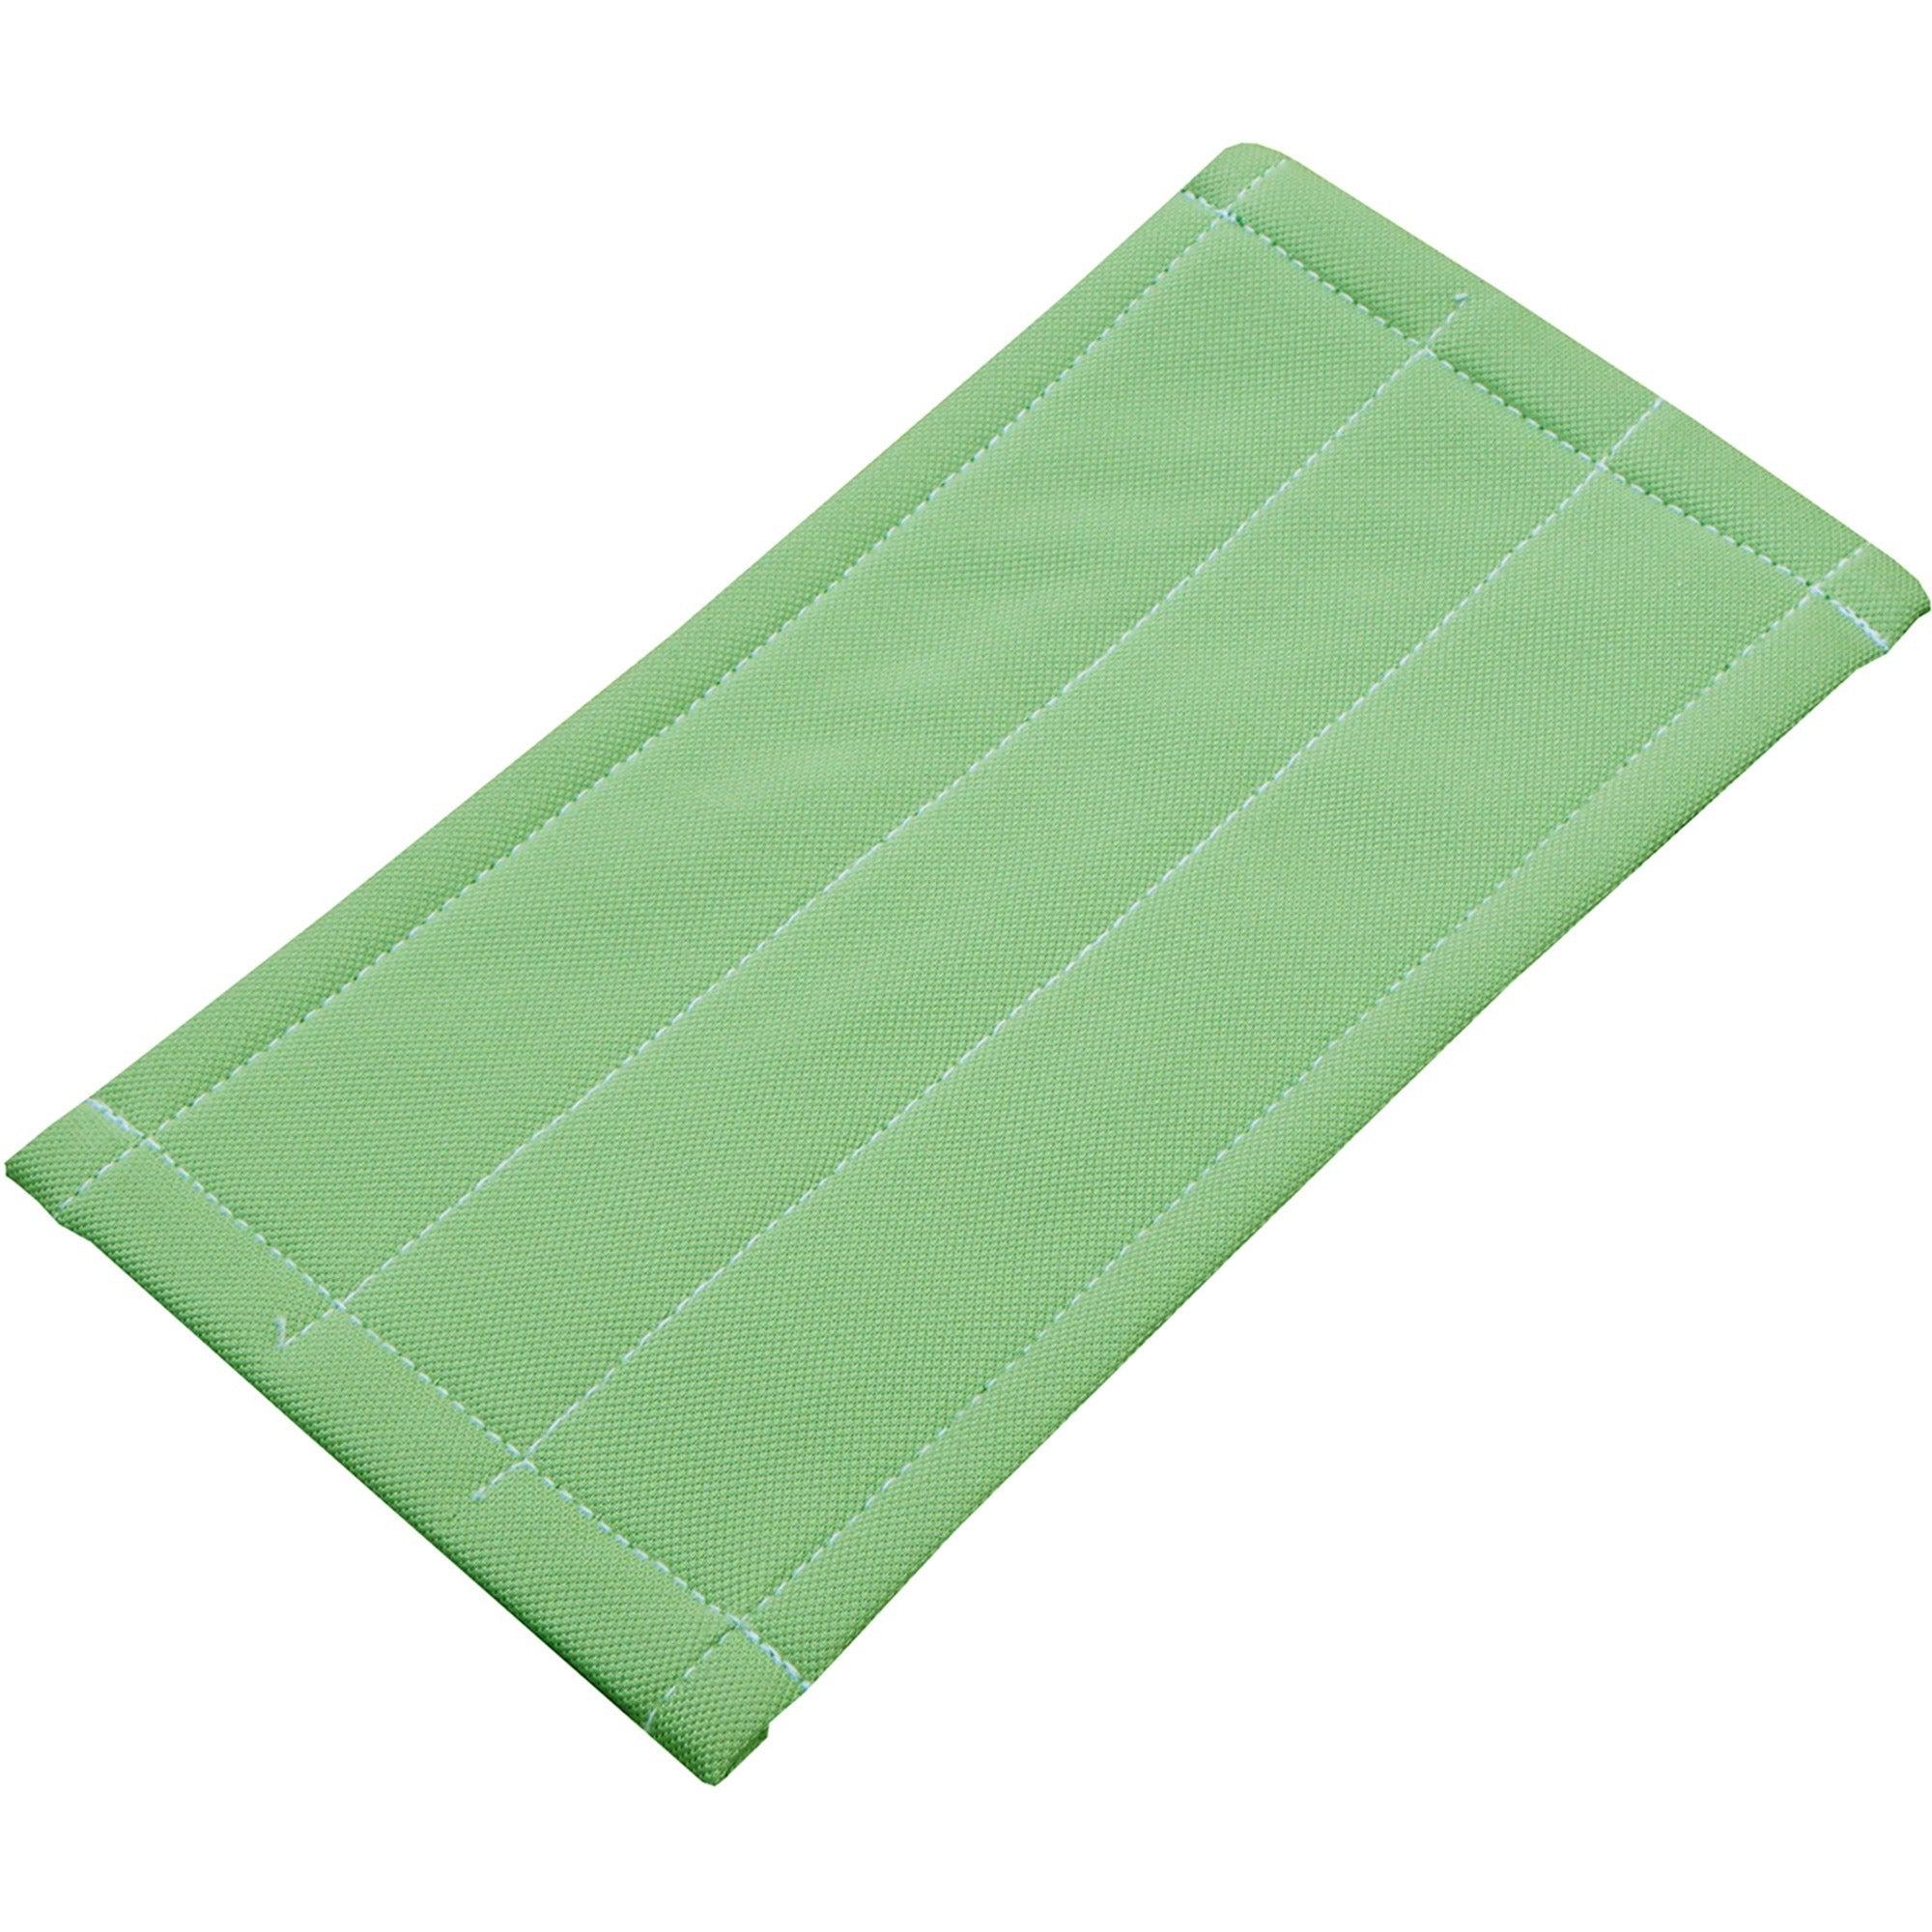 unger-aluminum-pad-holder-microfiber-cleaning-pad-1each-rectangle-8-width-cleaning-glass-microfiber-green_ungphl20 - 1